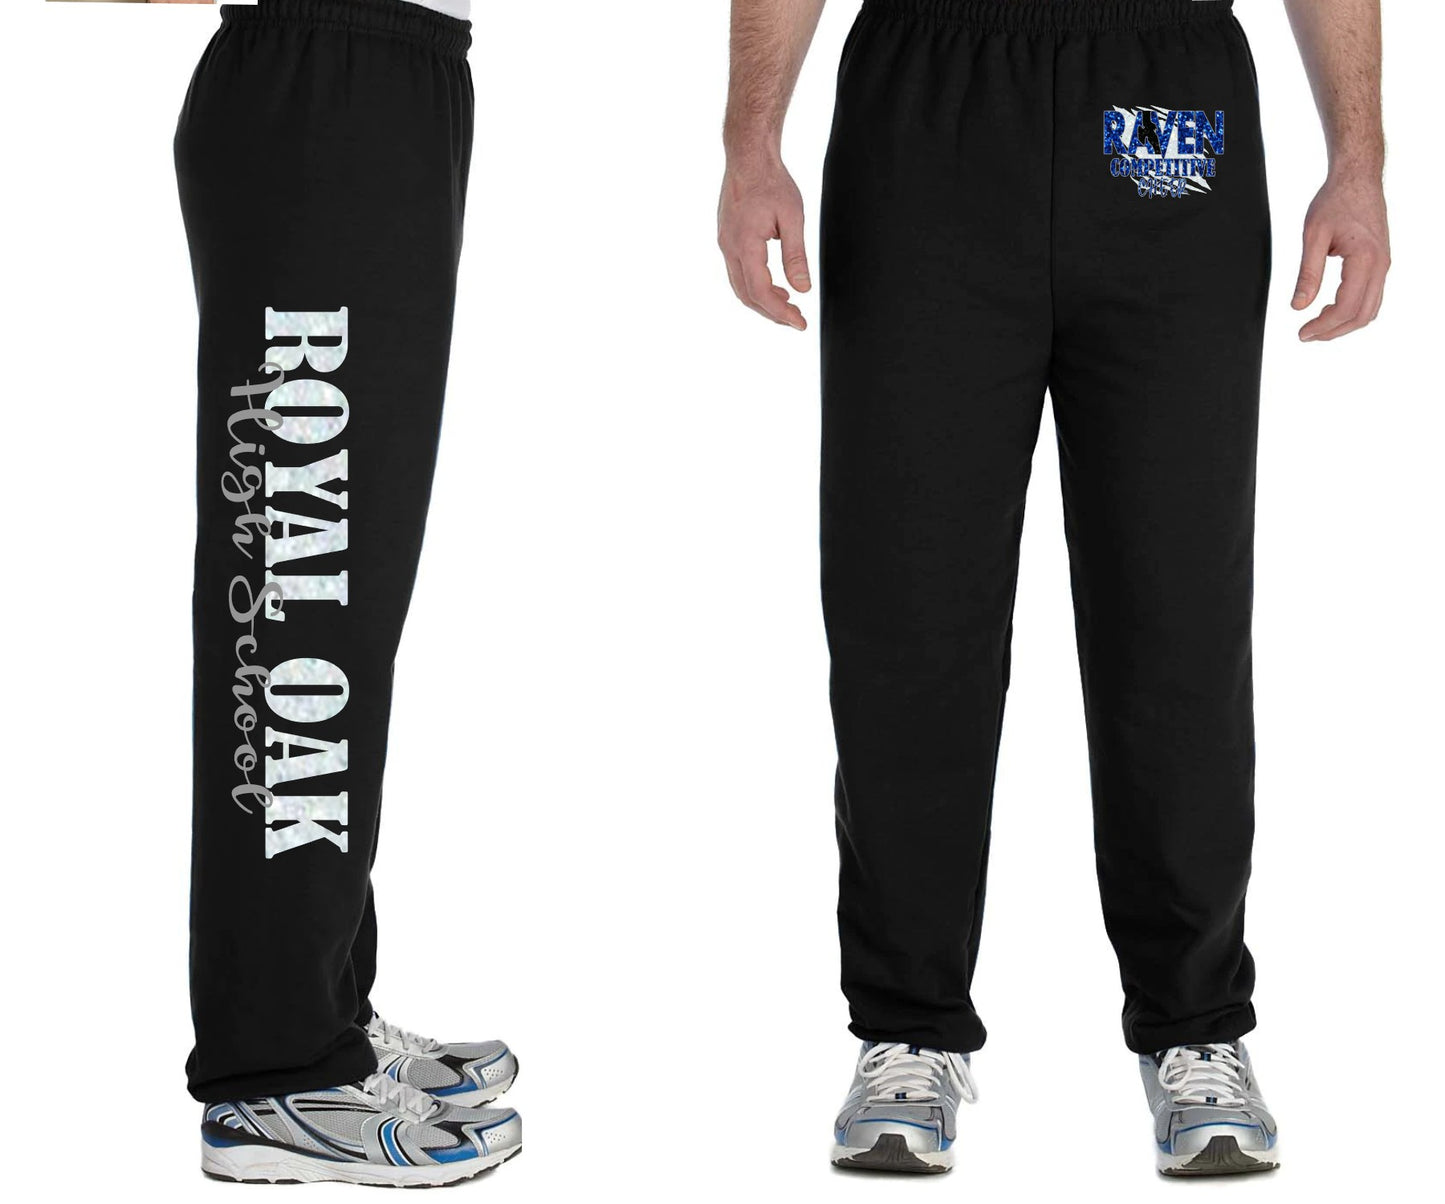 ROHS COMPETITION SWEATPANTS ***TEAM MEMBER REQUIRED ITEM***